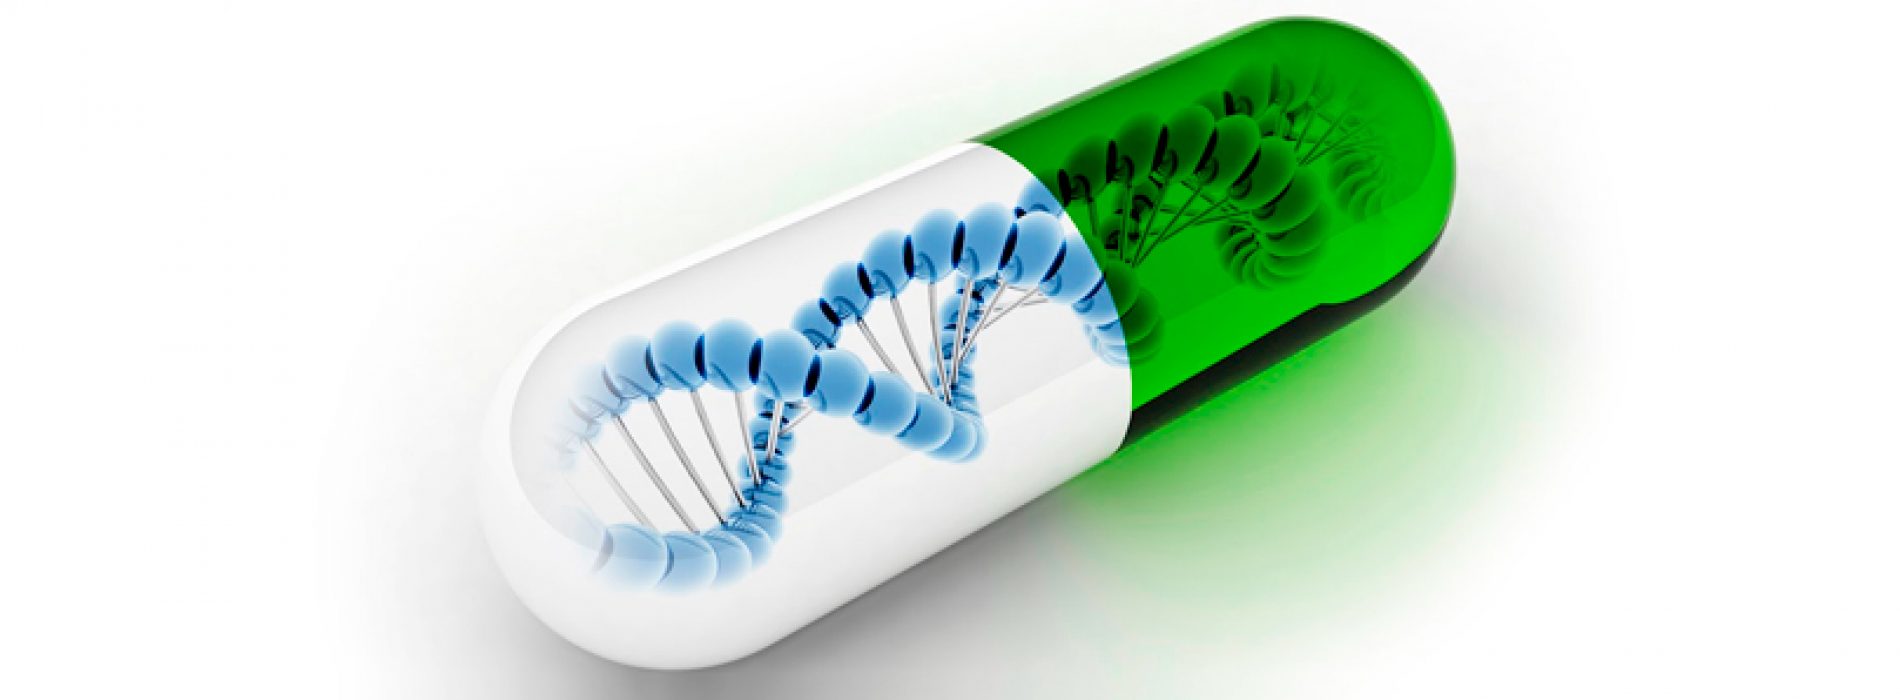 Seminar: "pharmacogenetics, and its application to antiretroviral therapy"